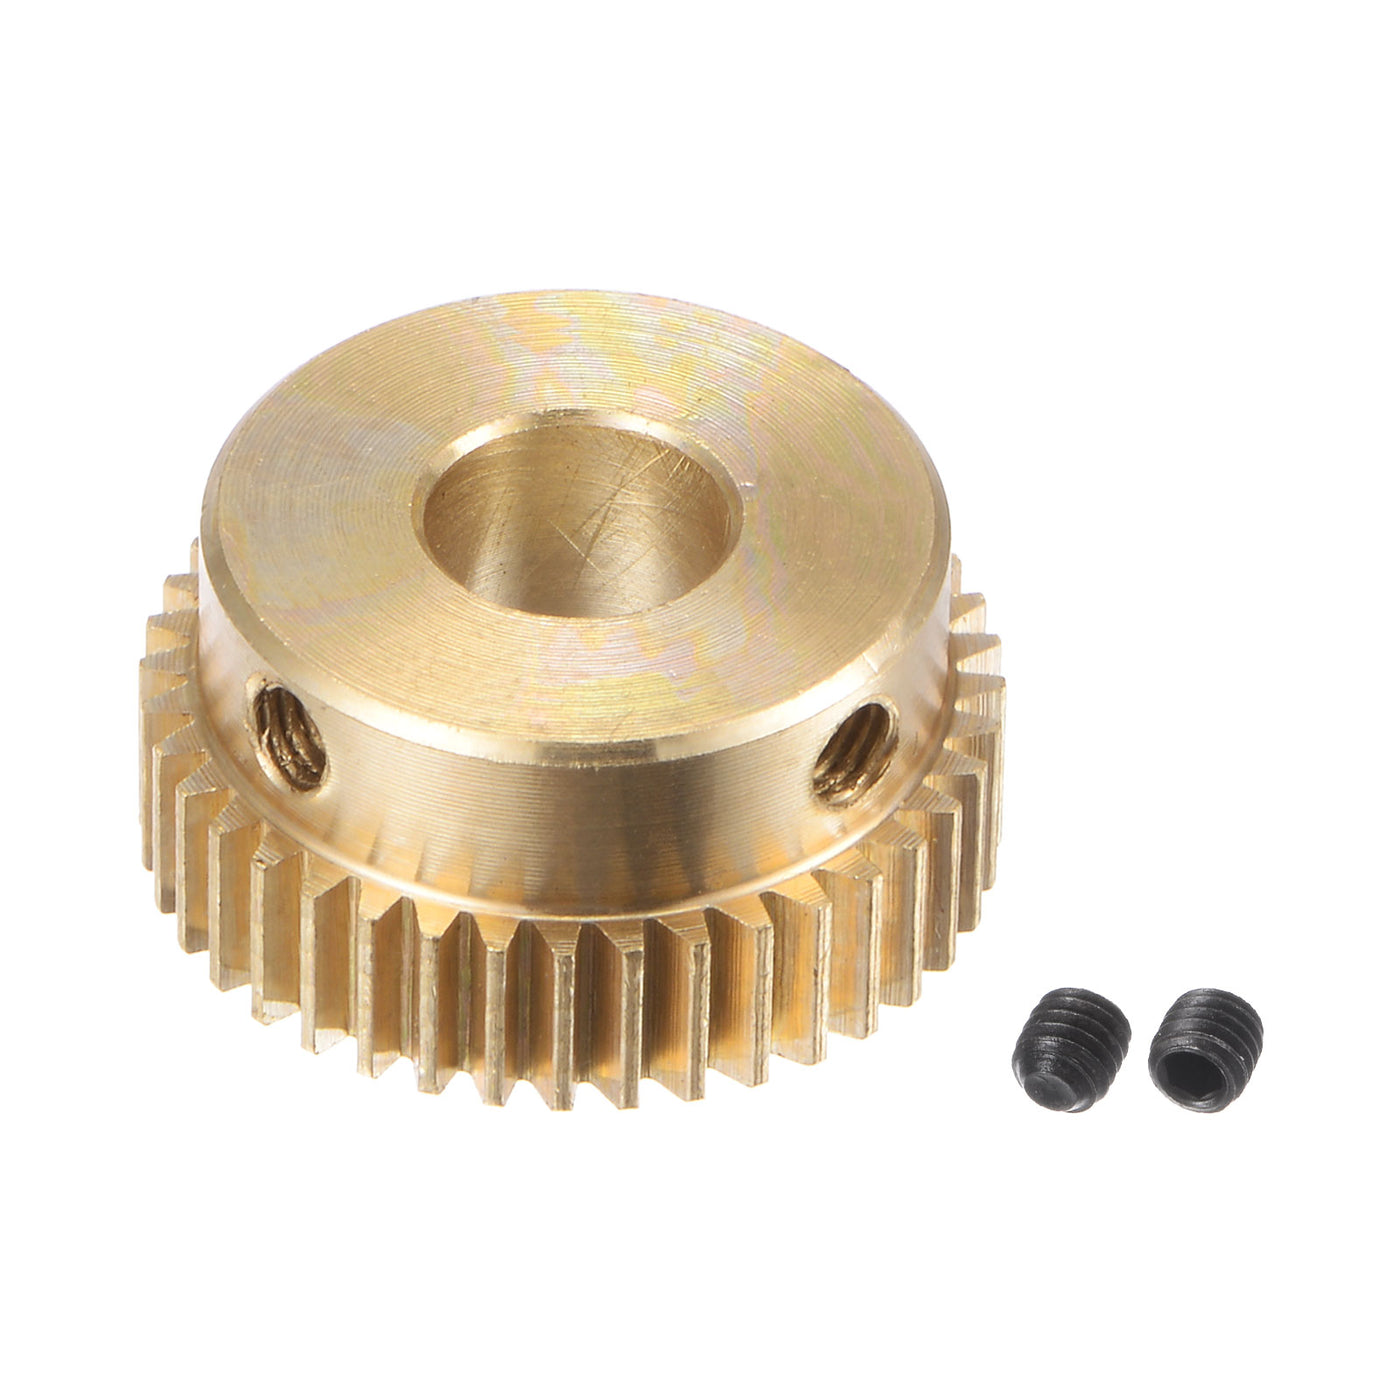 uxcell Uxcell 0.5 Mod 40T 7mm Bore 21mm Outer Dia Brass Motor Rack Pinion Gear with Screws